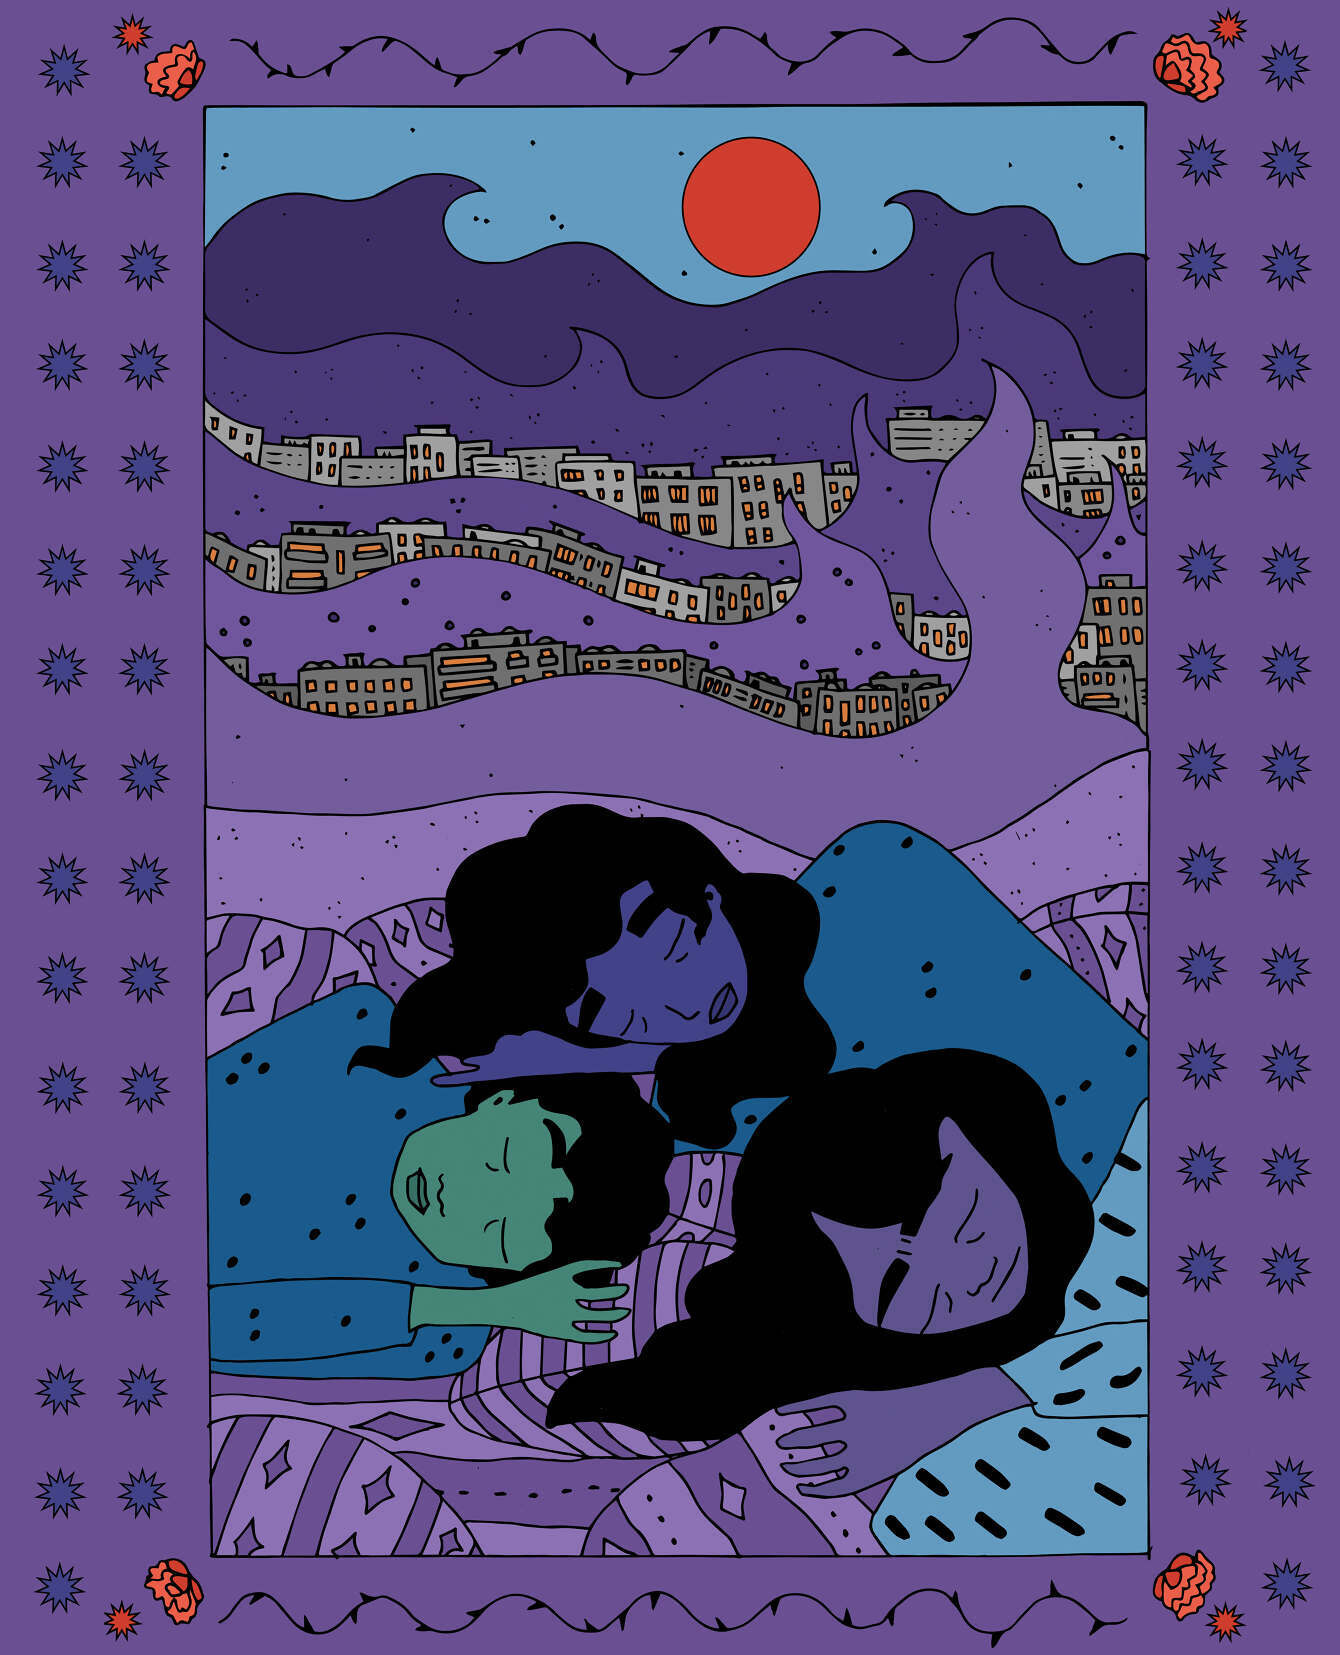 Three figures are lying down asleep in the foreground surrounded by patterned cushions; behind them is a fragmented cityscape caught in purple flames, with an orange sun centred in the background. The image has a purple border with repeated purple stars.